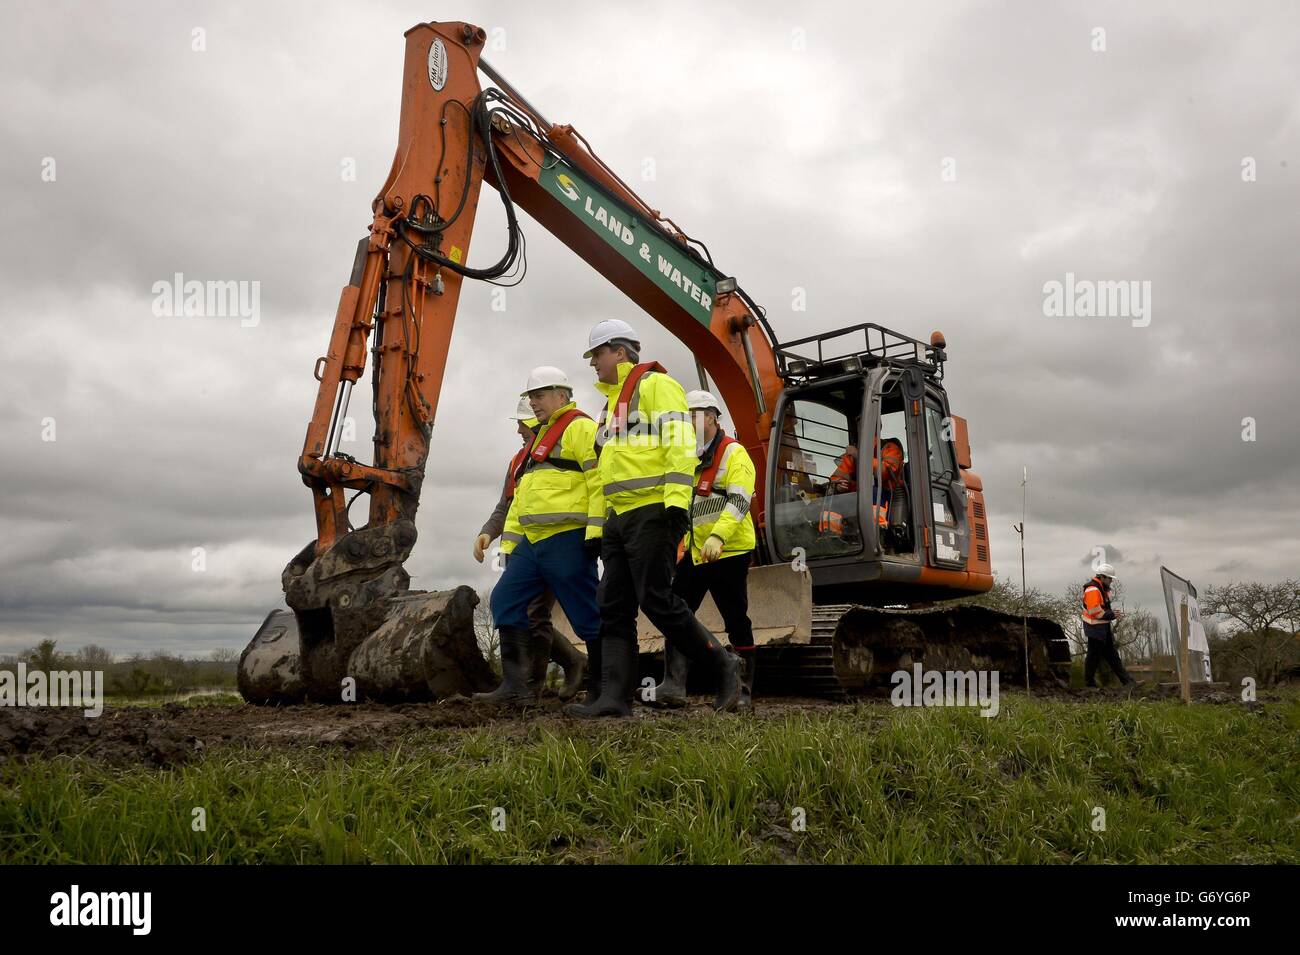 Prime Minister David Cameron is shown the dredging operation on site at the River Parrett, near Burrowbridge, Somerset, where repair and recovery from the floods earlier in 2014 are taking place. Stock Photo